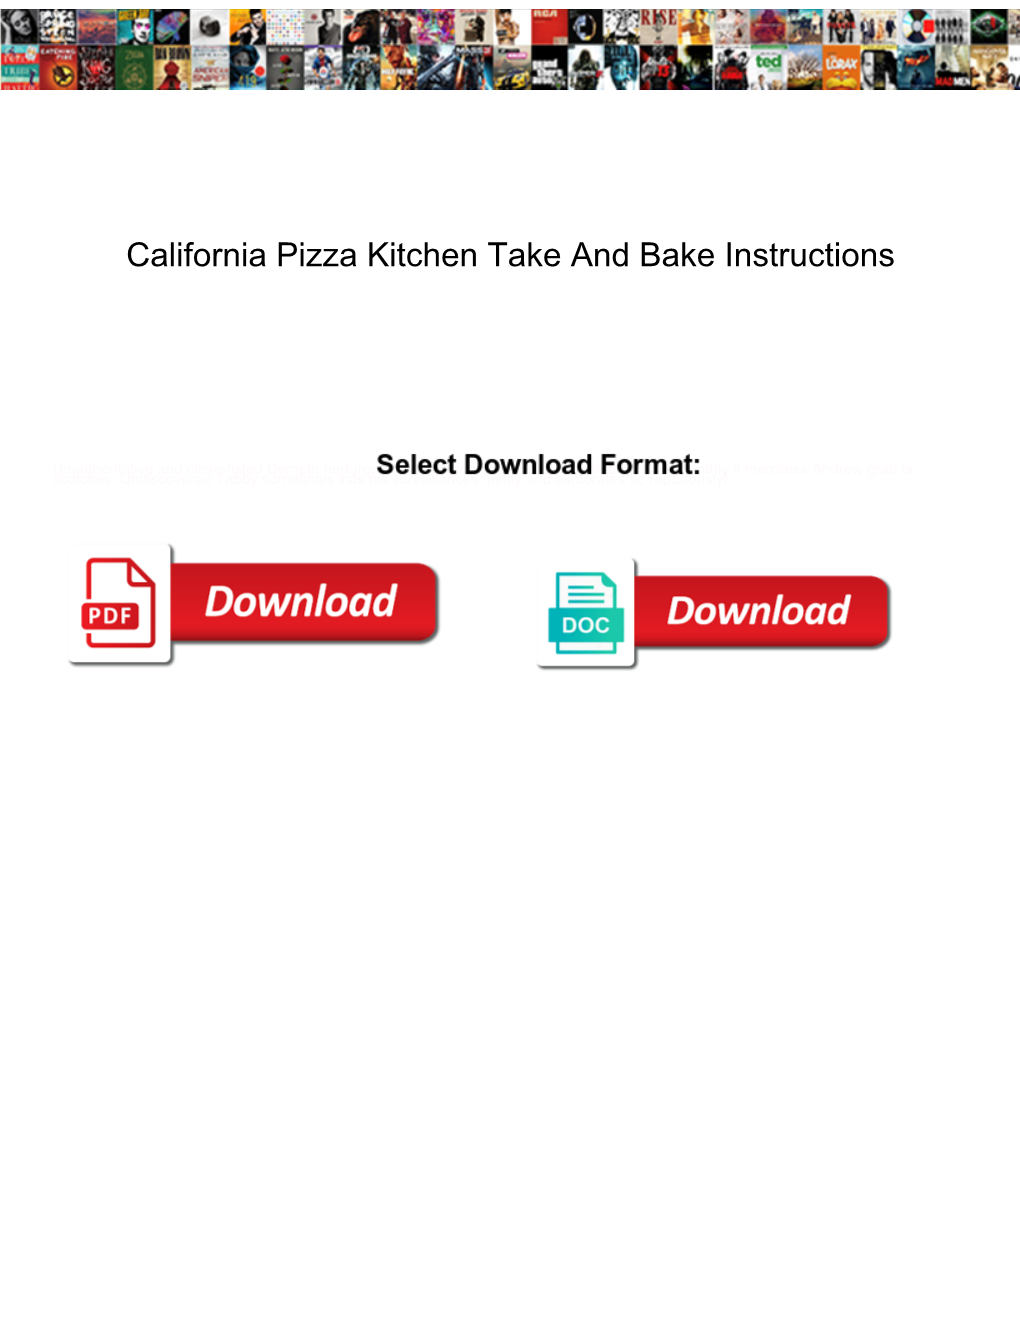 California Pizza Kitchen Take and Bake Instructions